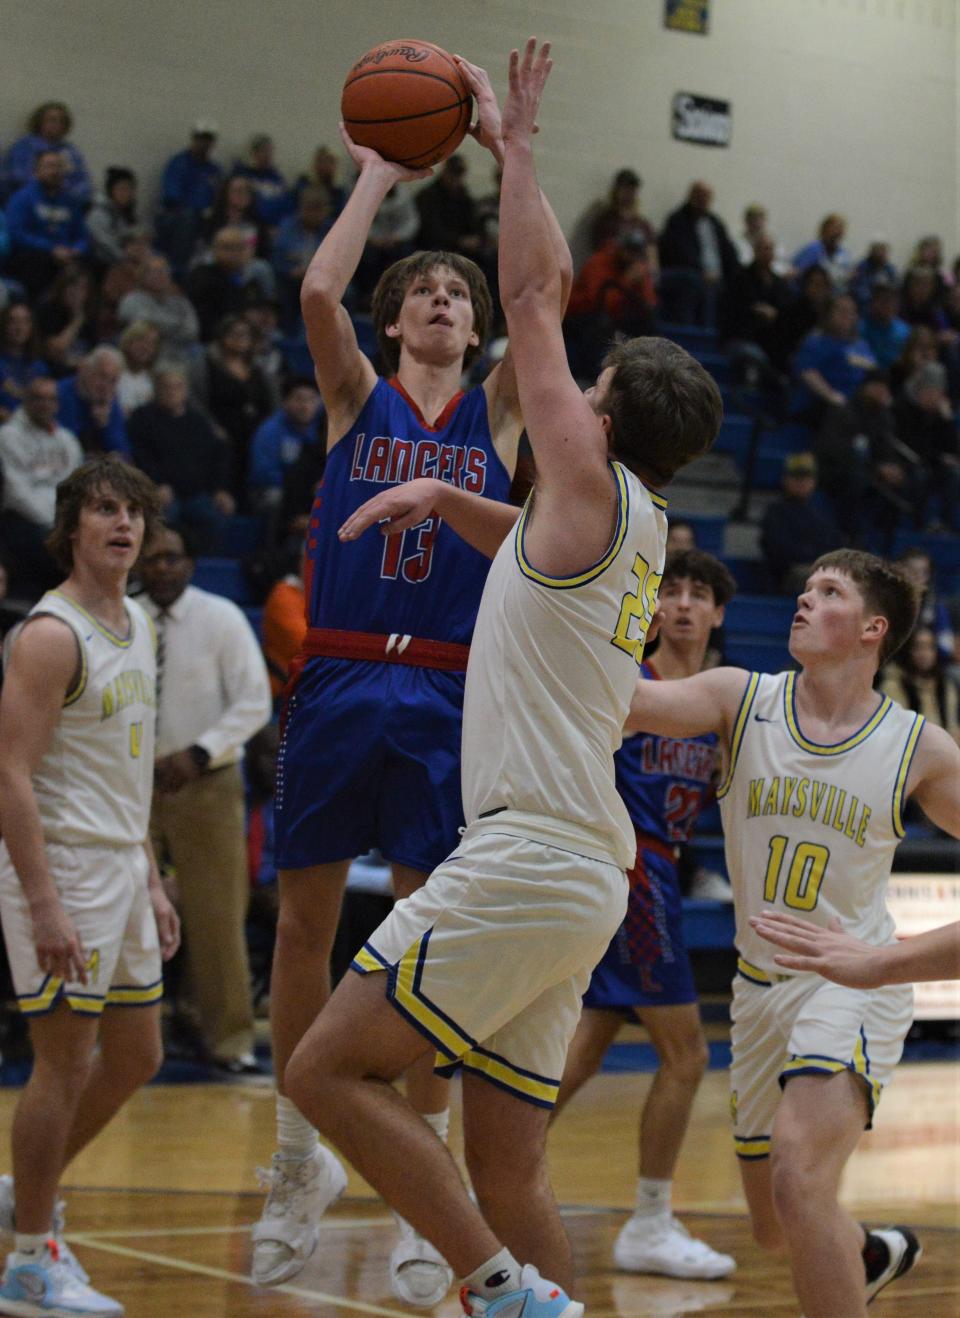 Lakewood's Troy Martindale shoots over a Maysville defender on Saturday. The host Panthers won 75-40.